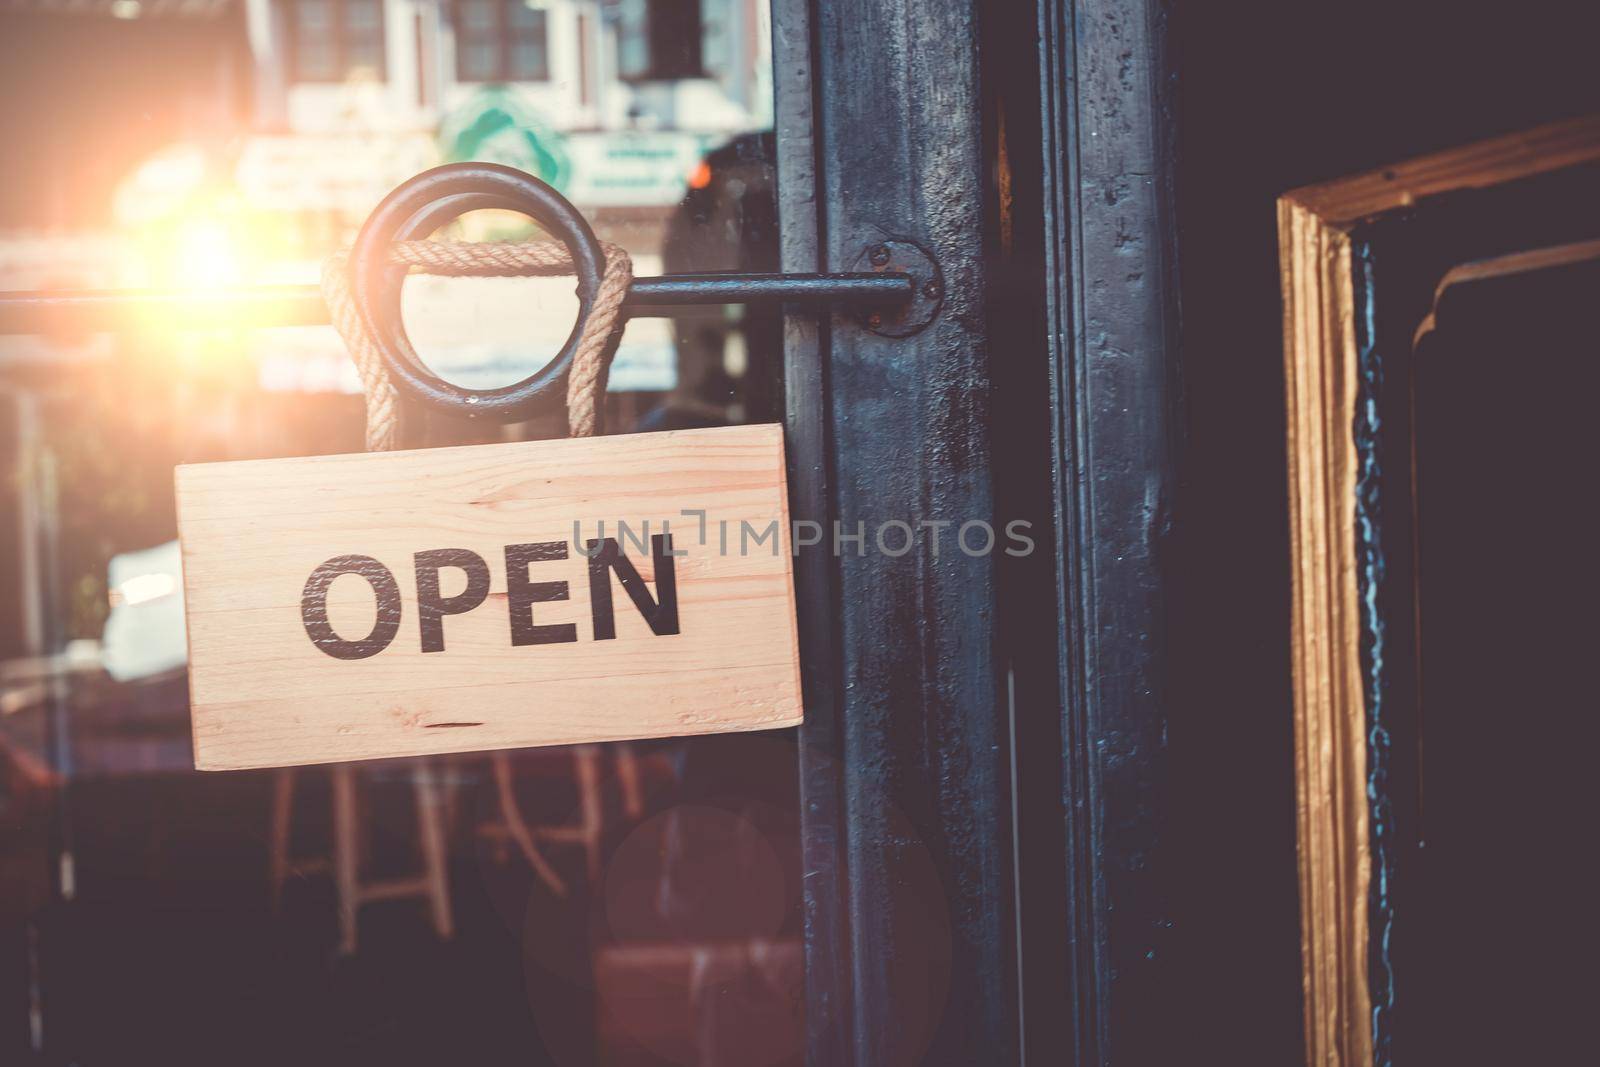 A business sign that says ‘Open’ on cafe or restaurant hang on door at entrance.  by Suwant